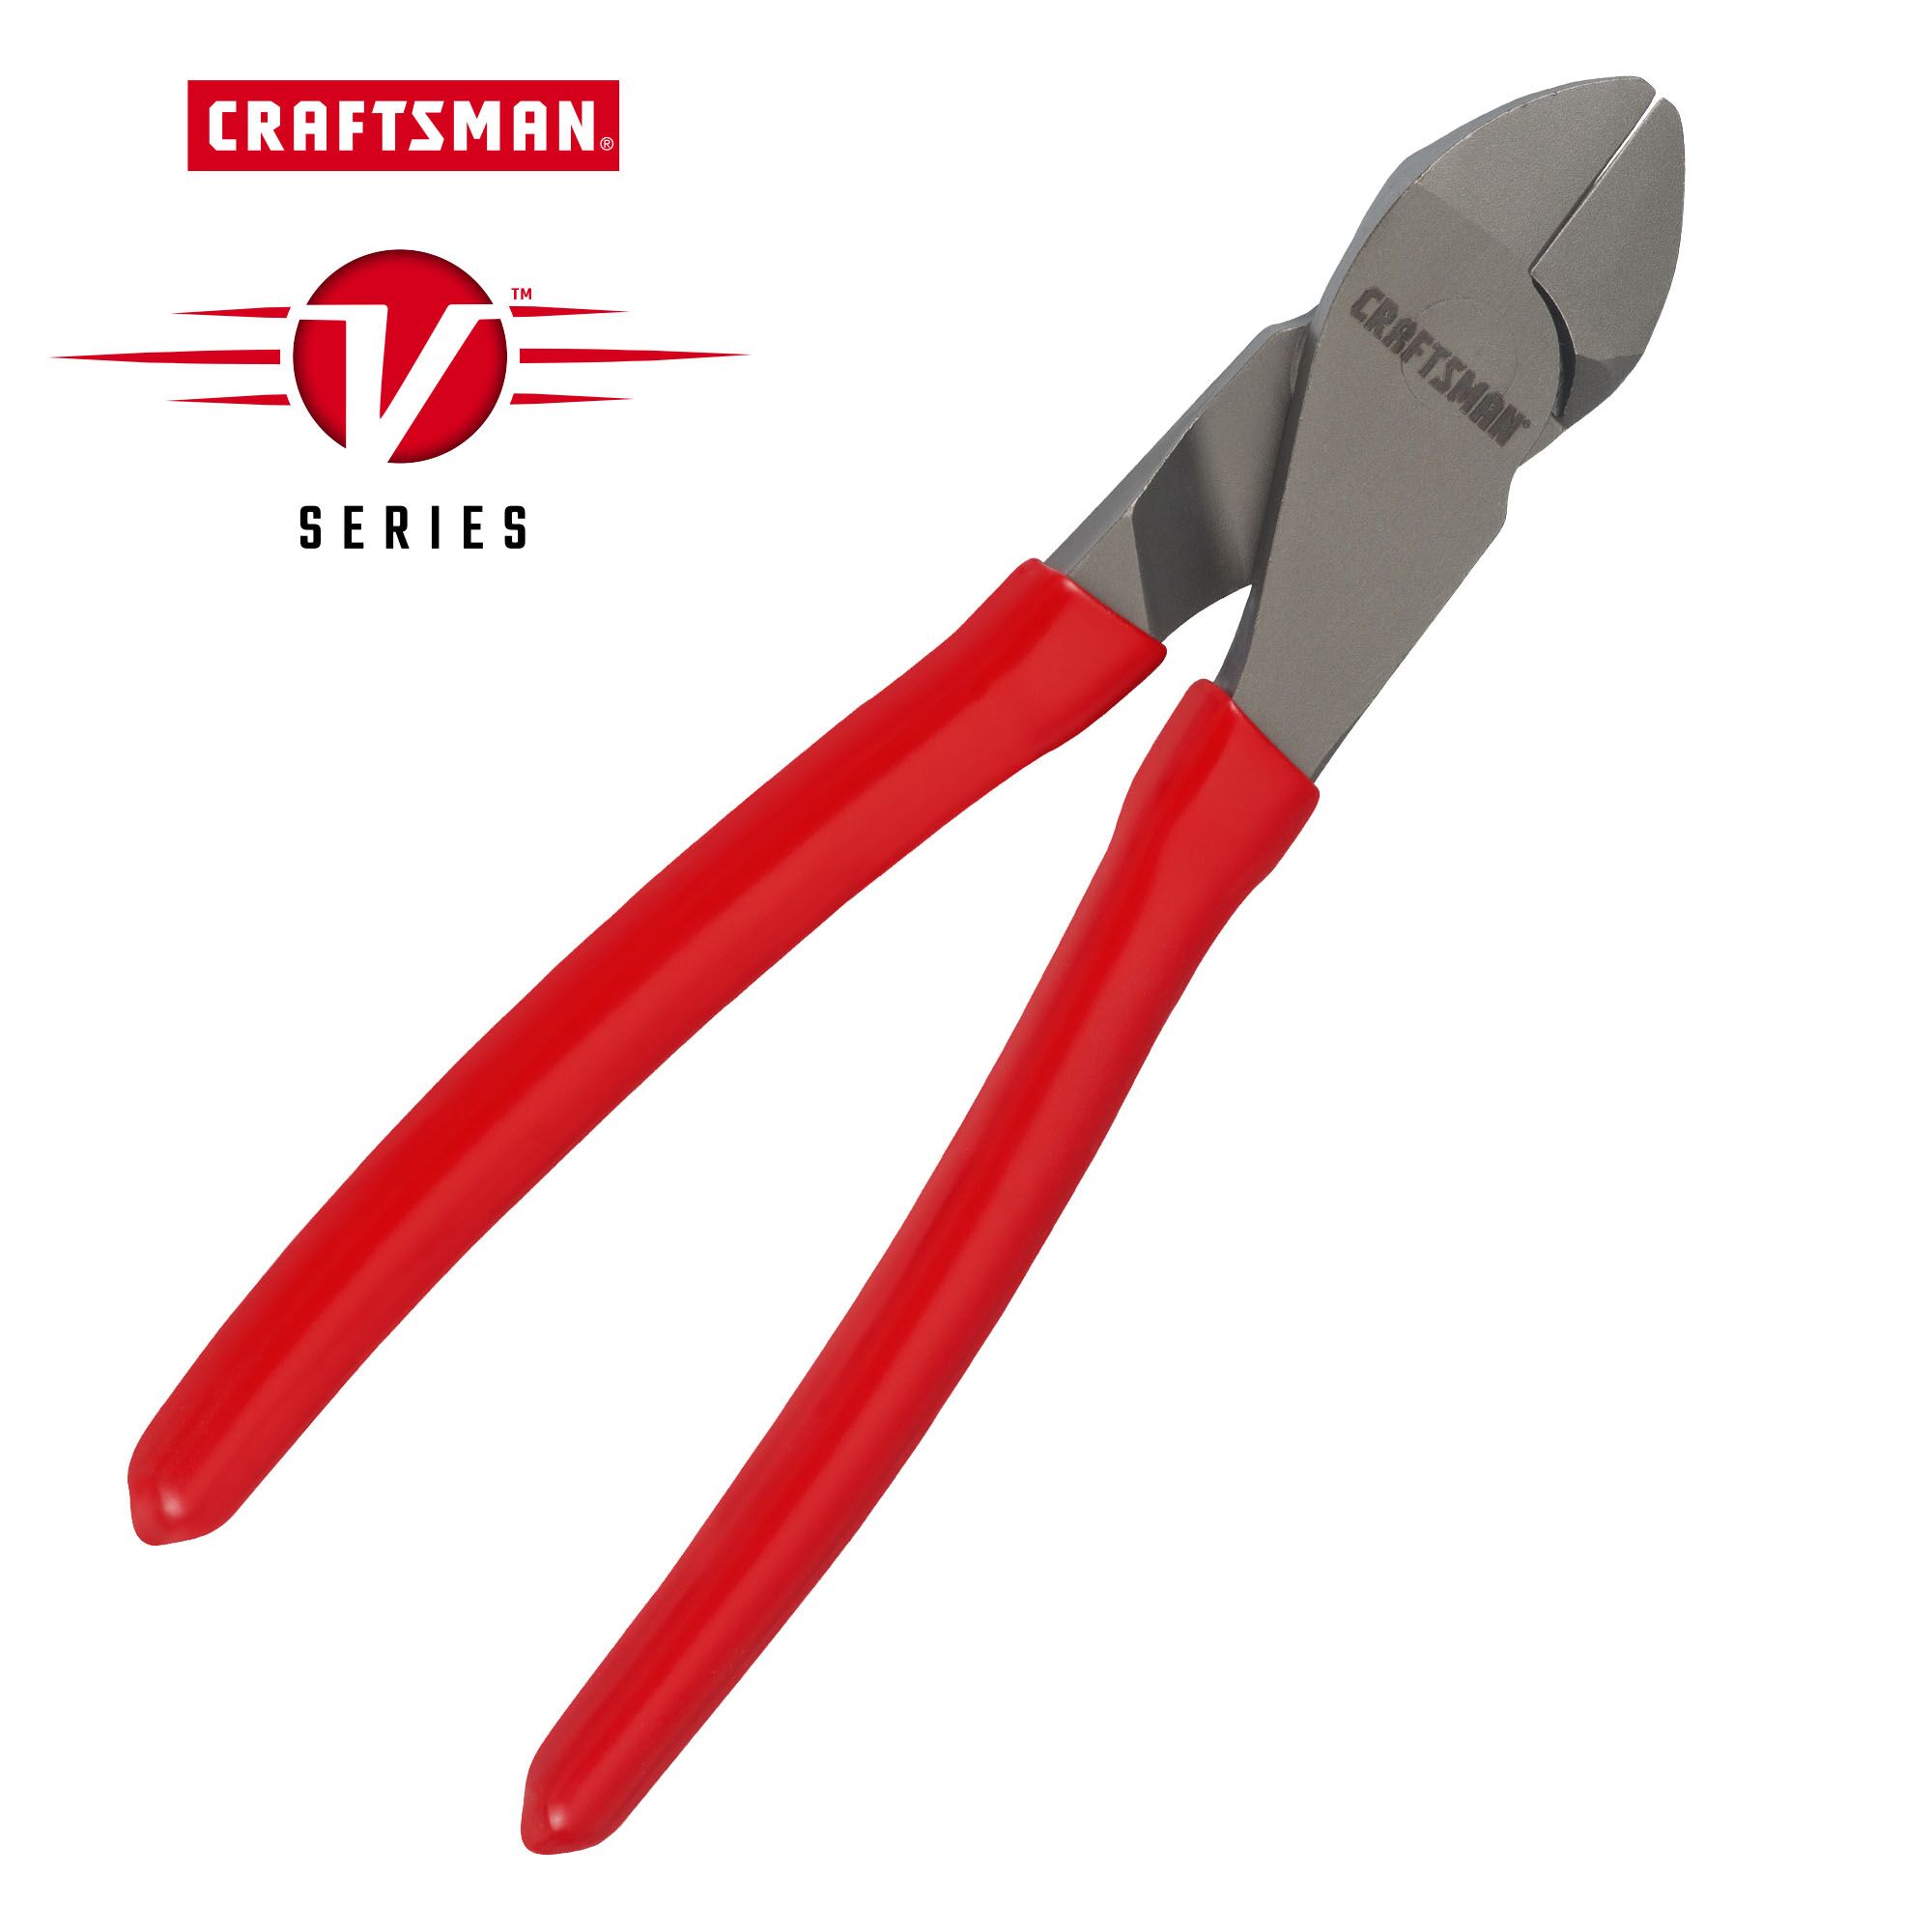 Graphic of CRAFTSMAN Pliers: Diagonal highlighting product features